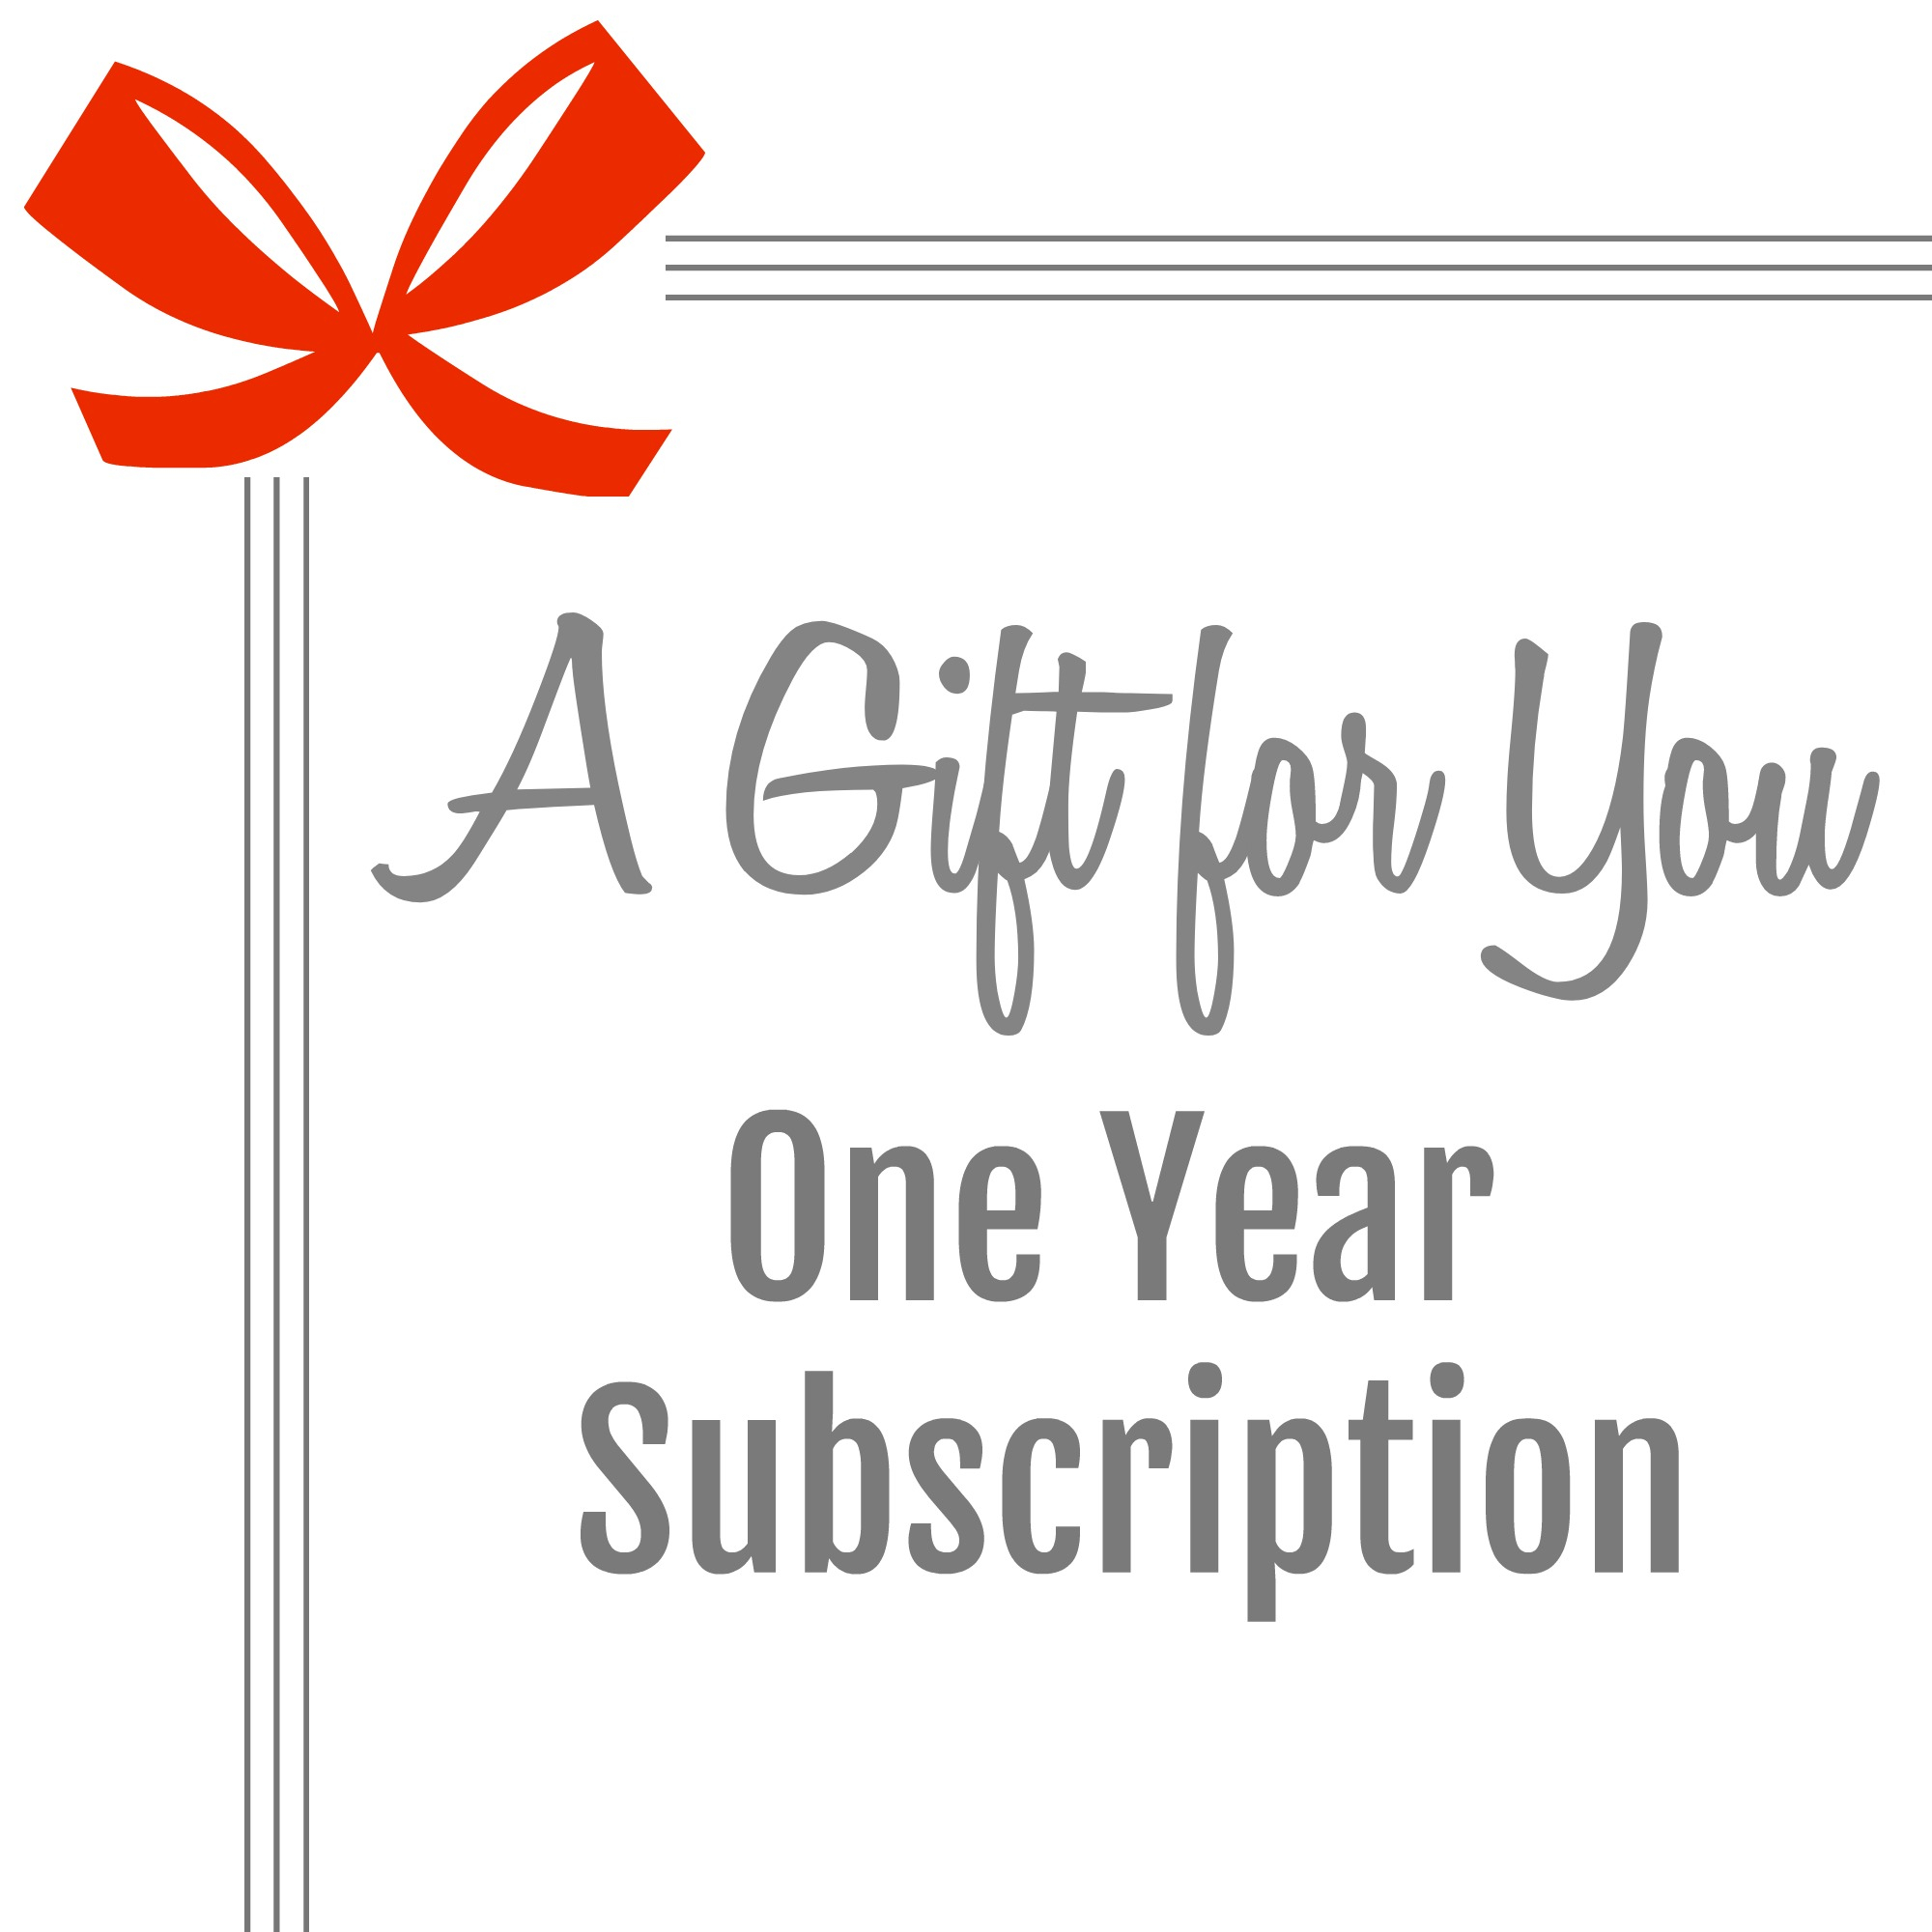 Print Our Free Magazine Subscription Gift Tags (Frugal Gift Idea) Intended For Magazine Subscription Gift Certificate Template